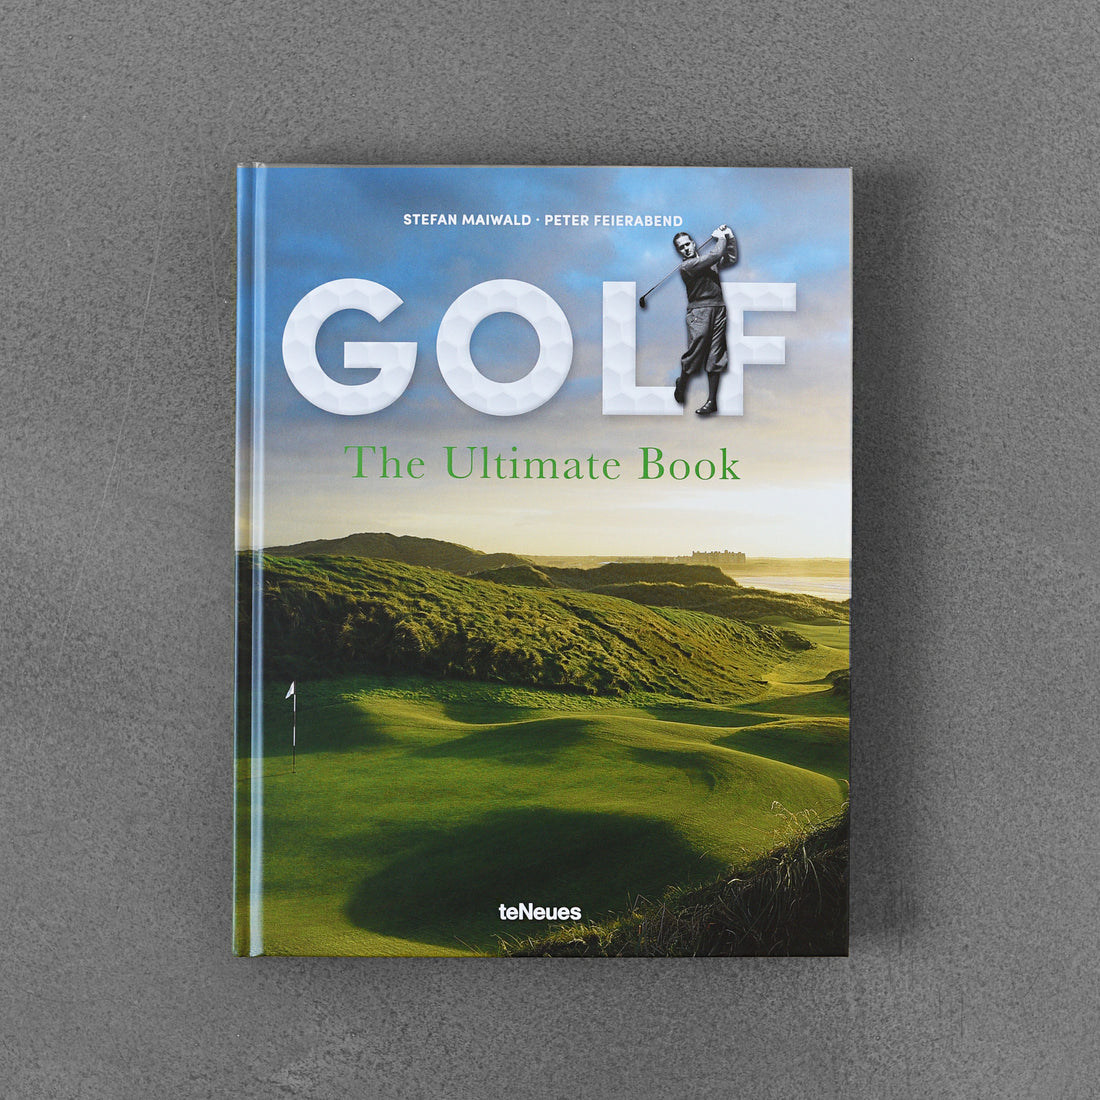 Golf, The Ultimate Book